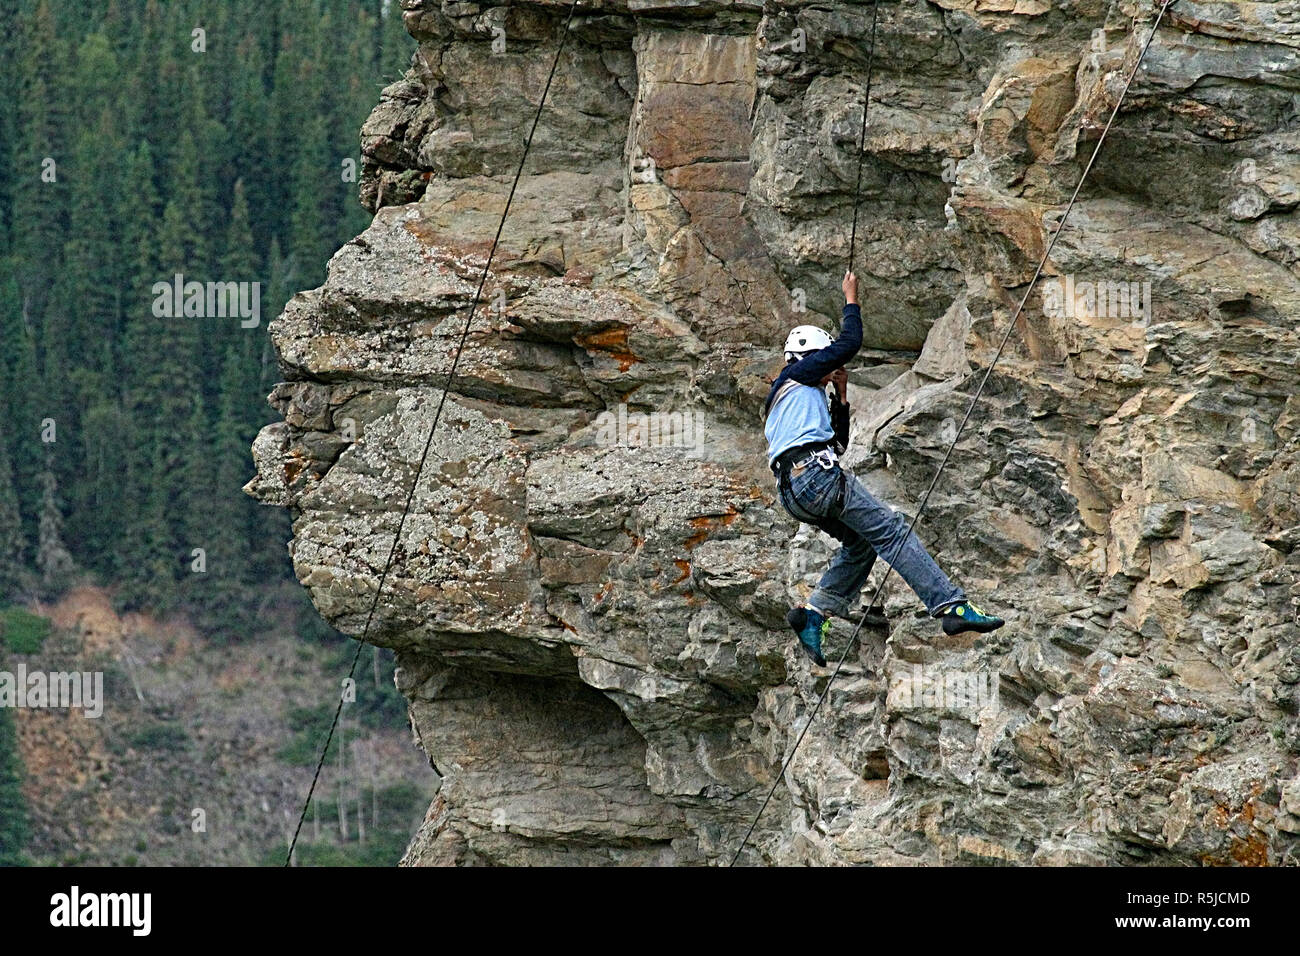 Rock repelling in the Yukon, Canada Stock Photo